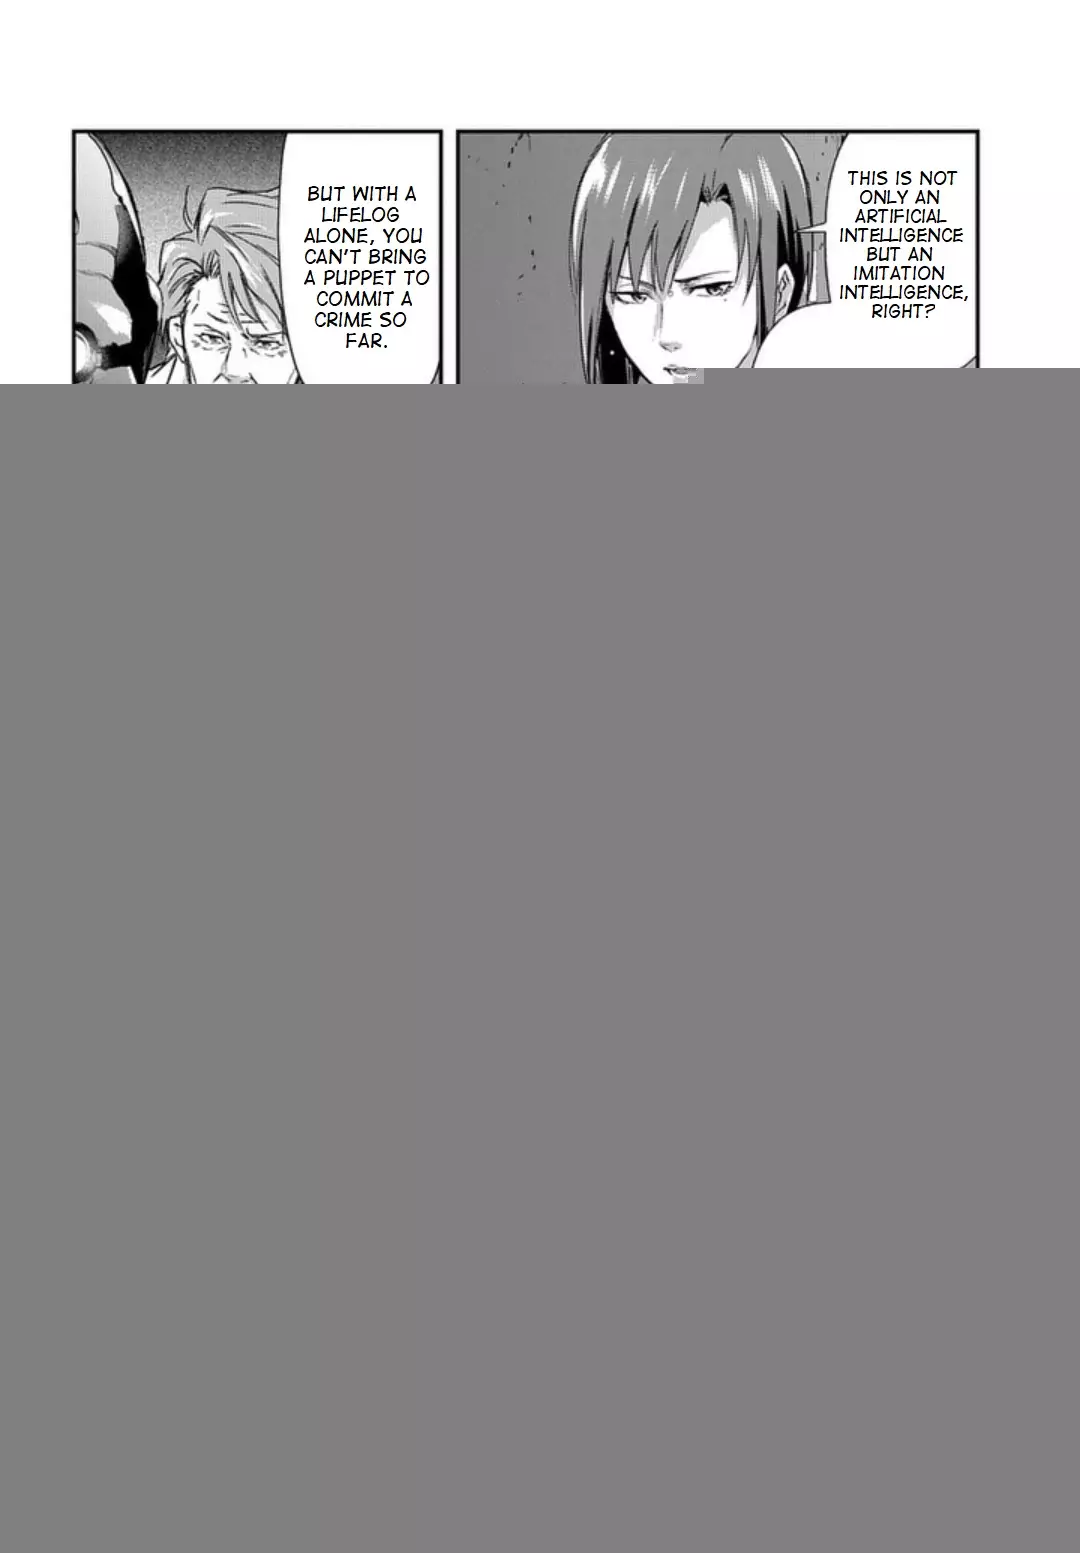 Psycho-Pass: Sinners Of The System Case 2 - First Guardian - 5 page 30-6024c2a1